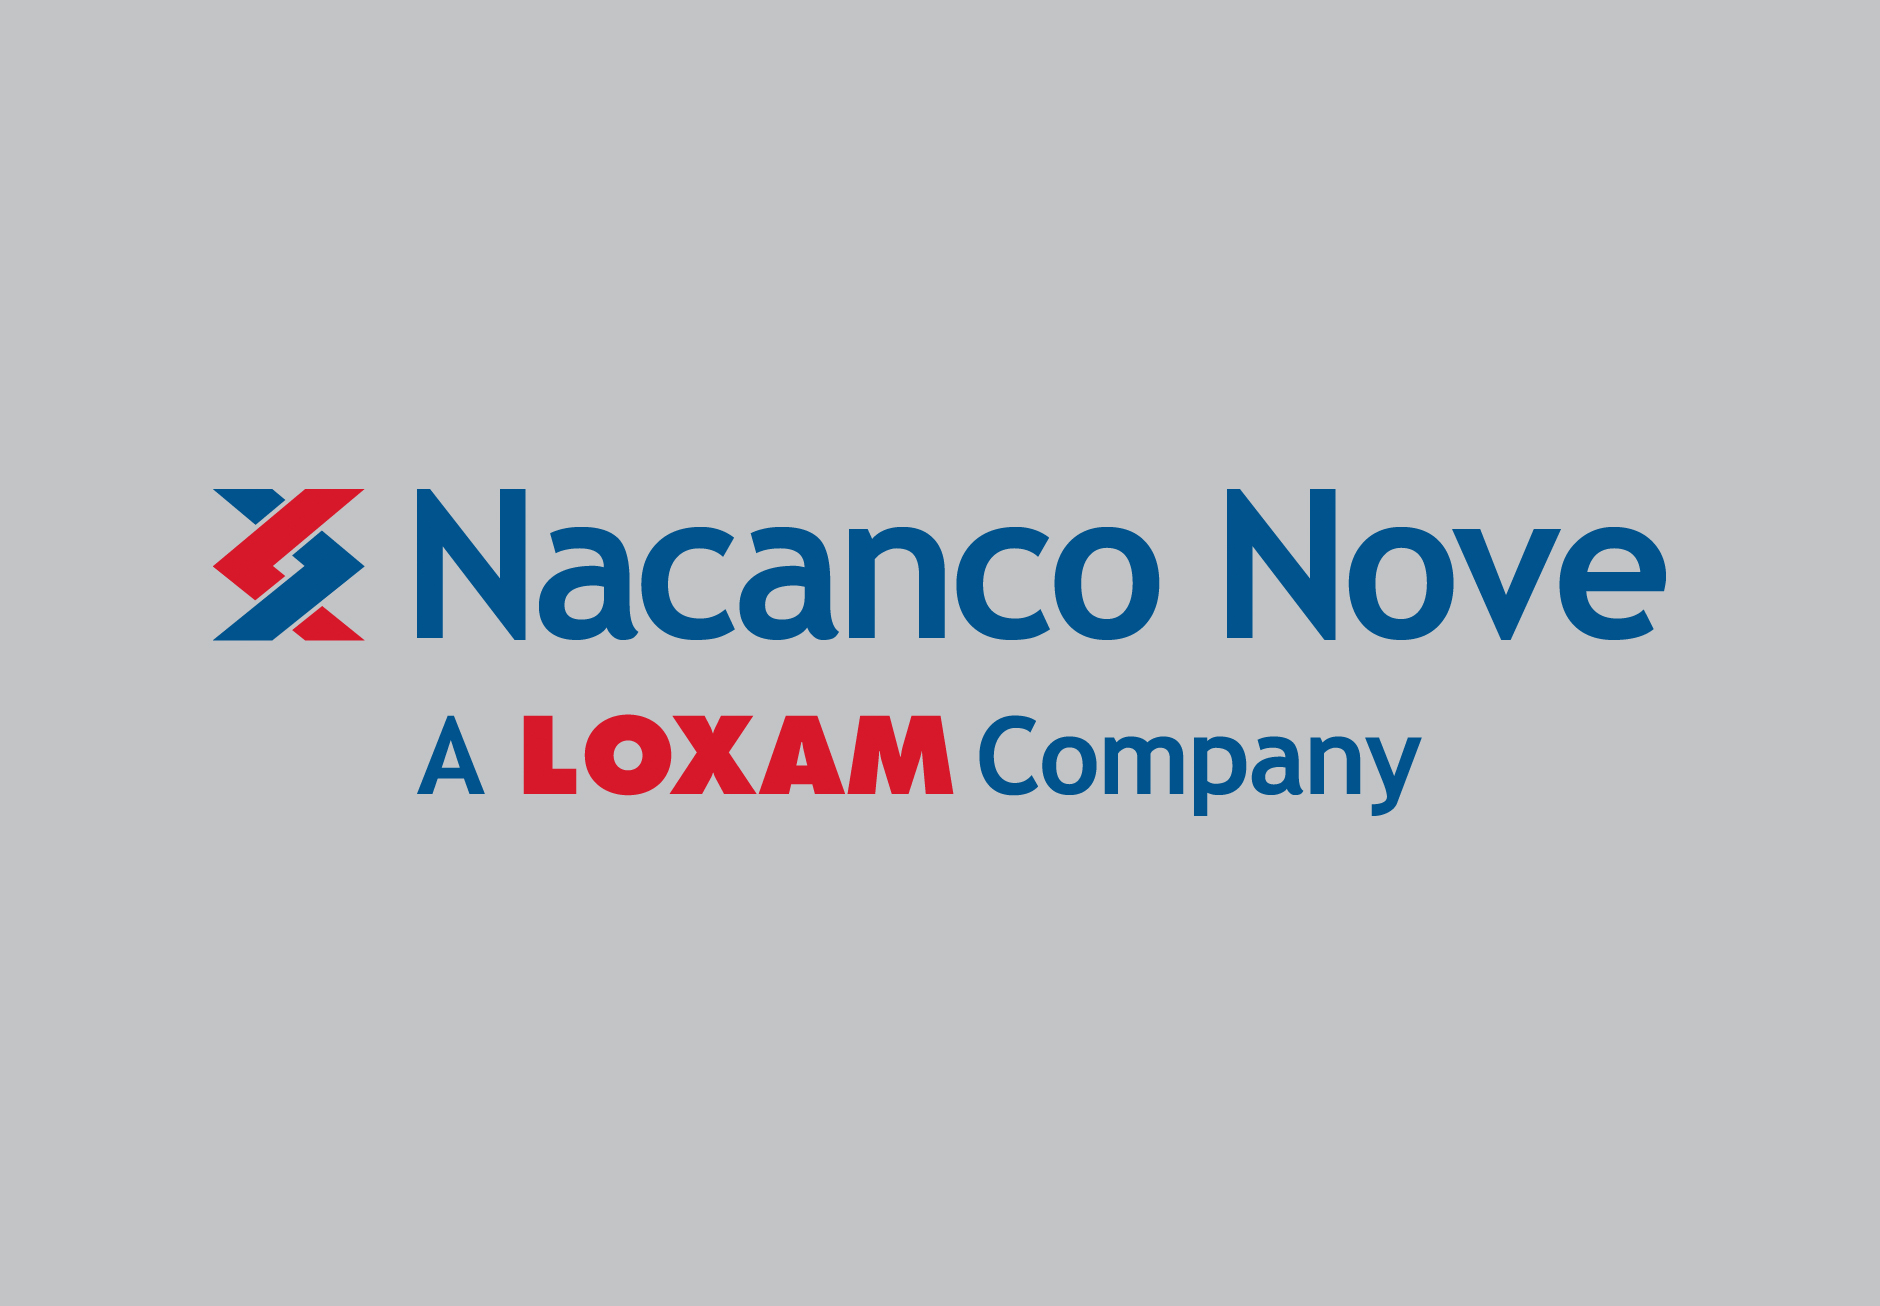 View job opportunities at Loxam Access Italy